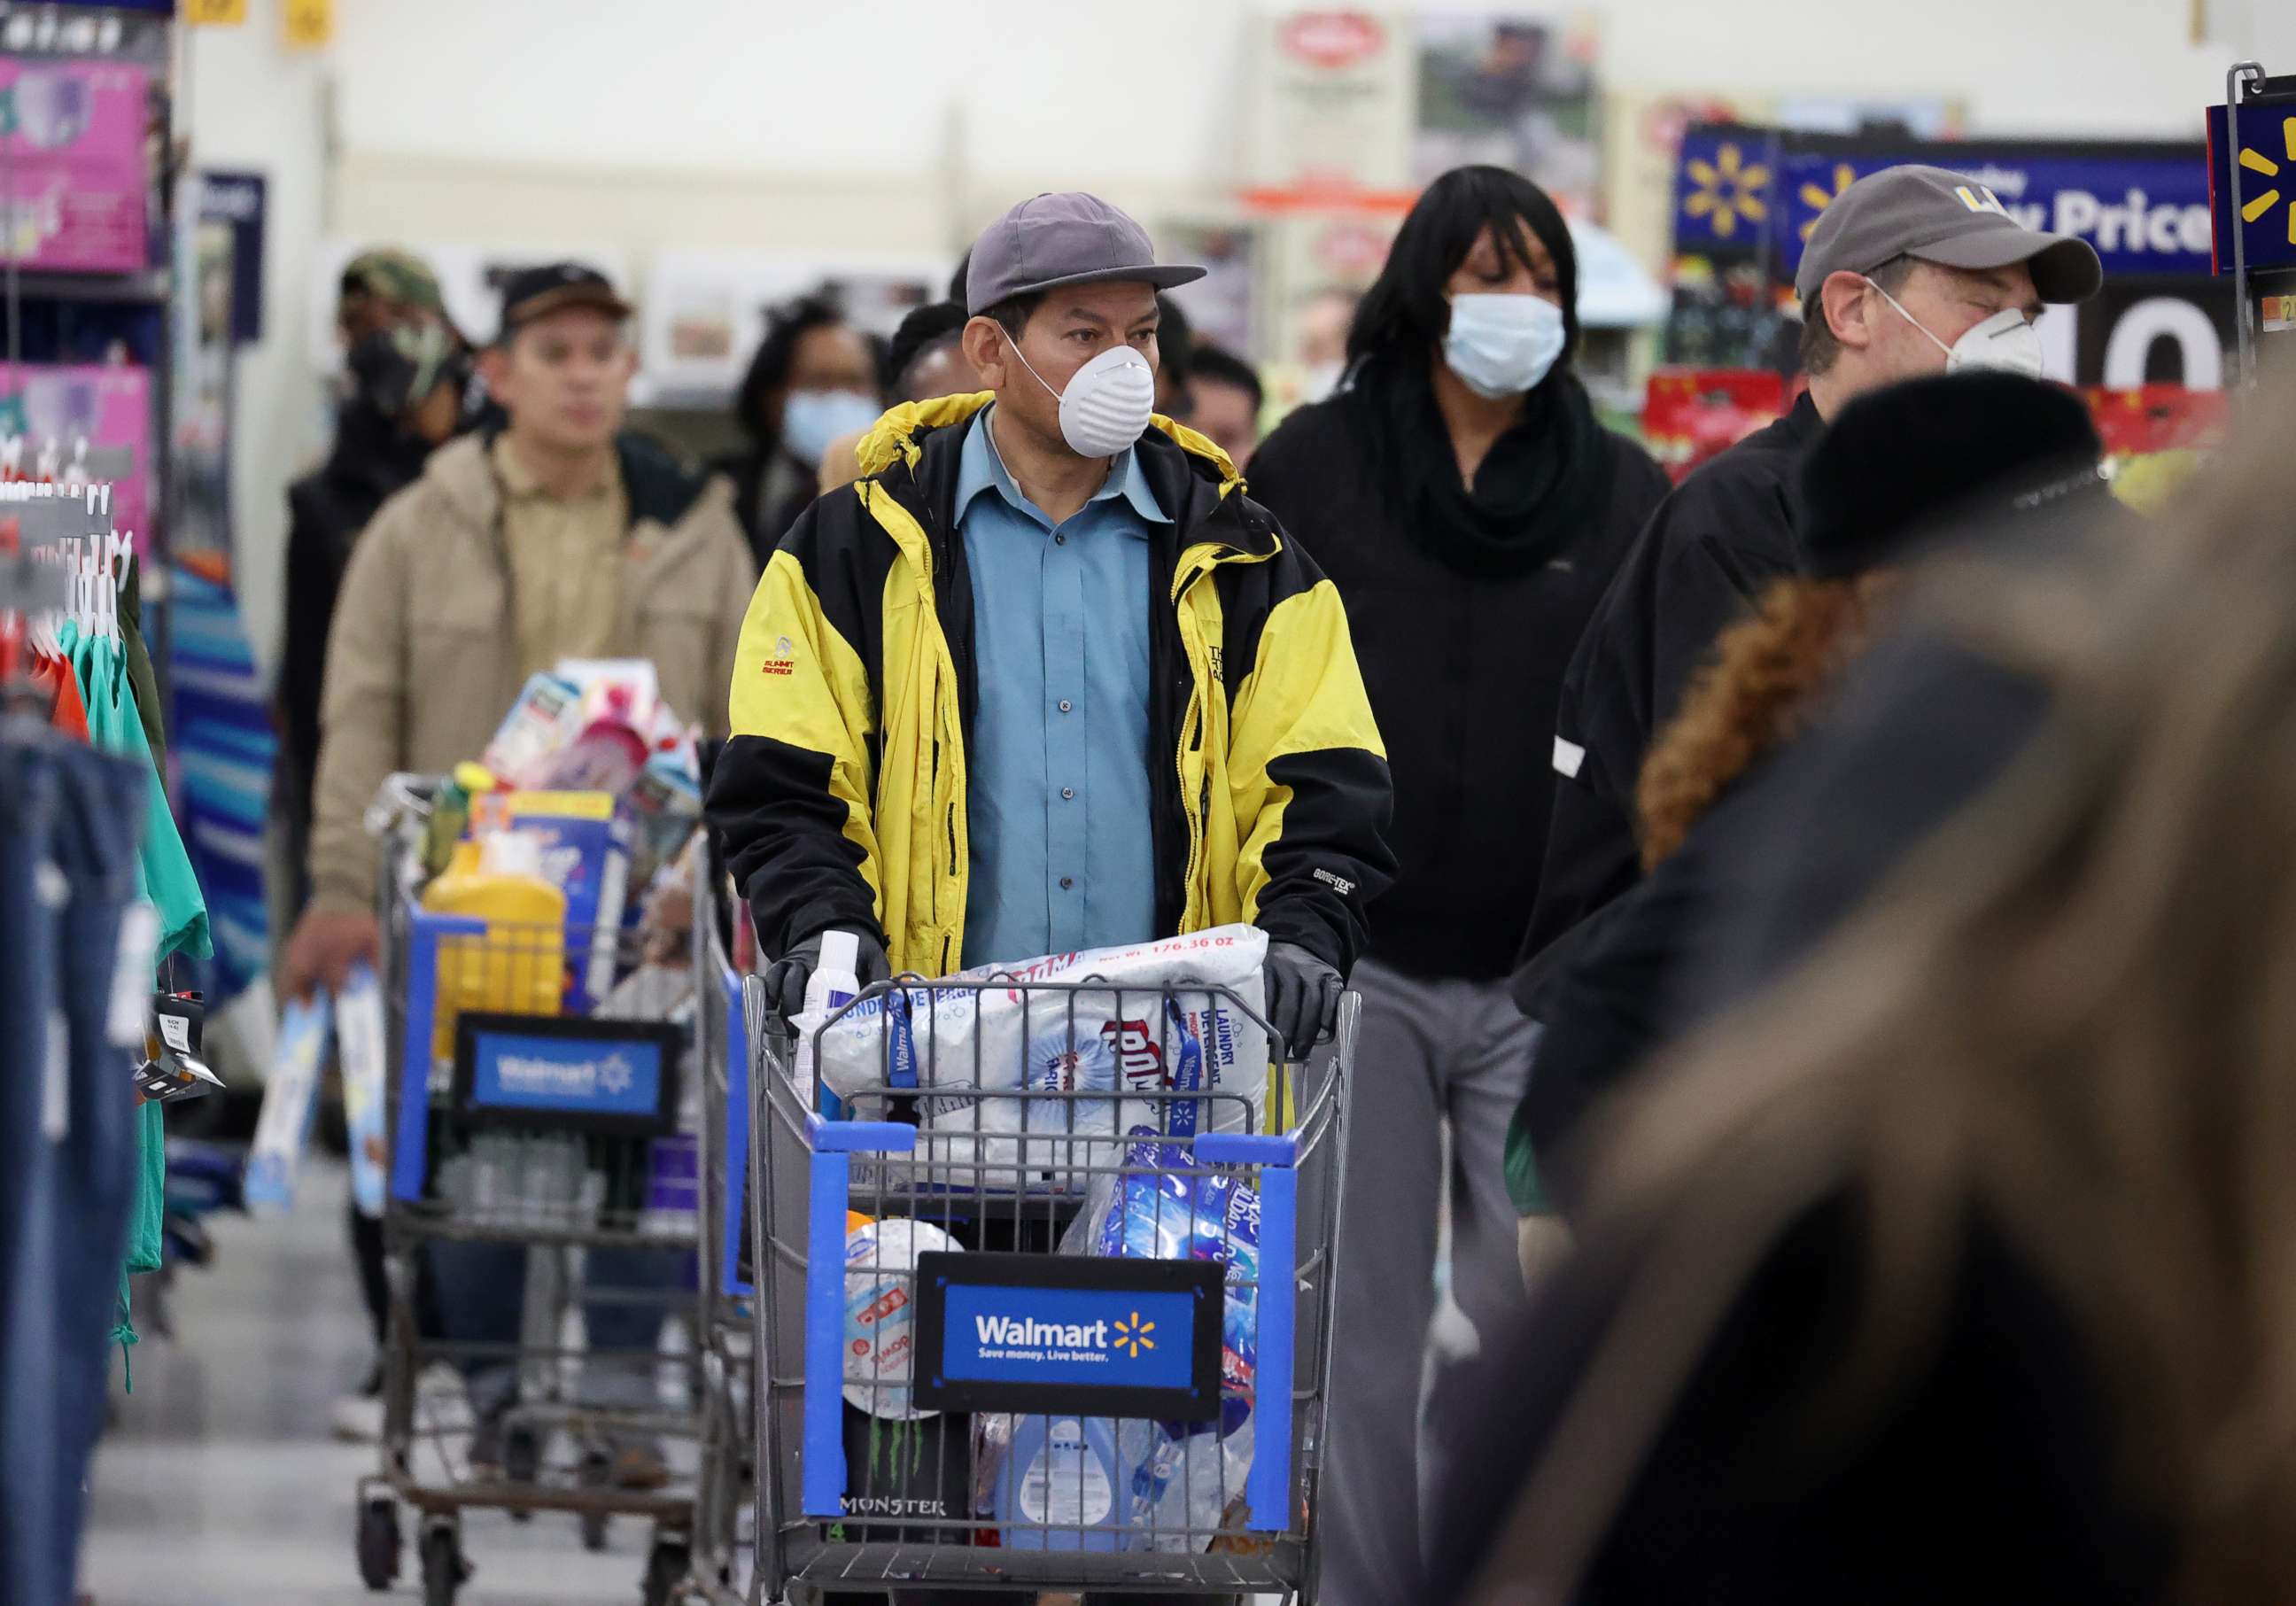 PHOTO: People wearing masks and gloves wait to checkout at Walmart on April 03, 2020, in Uniondale, New York.